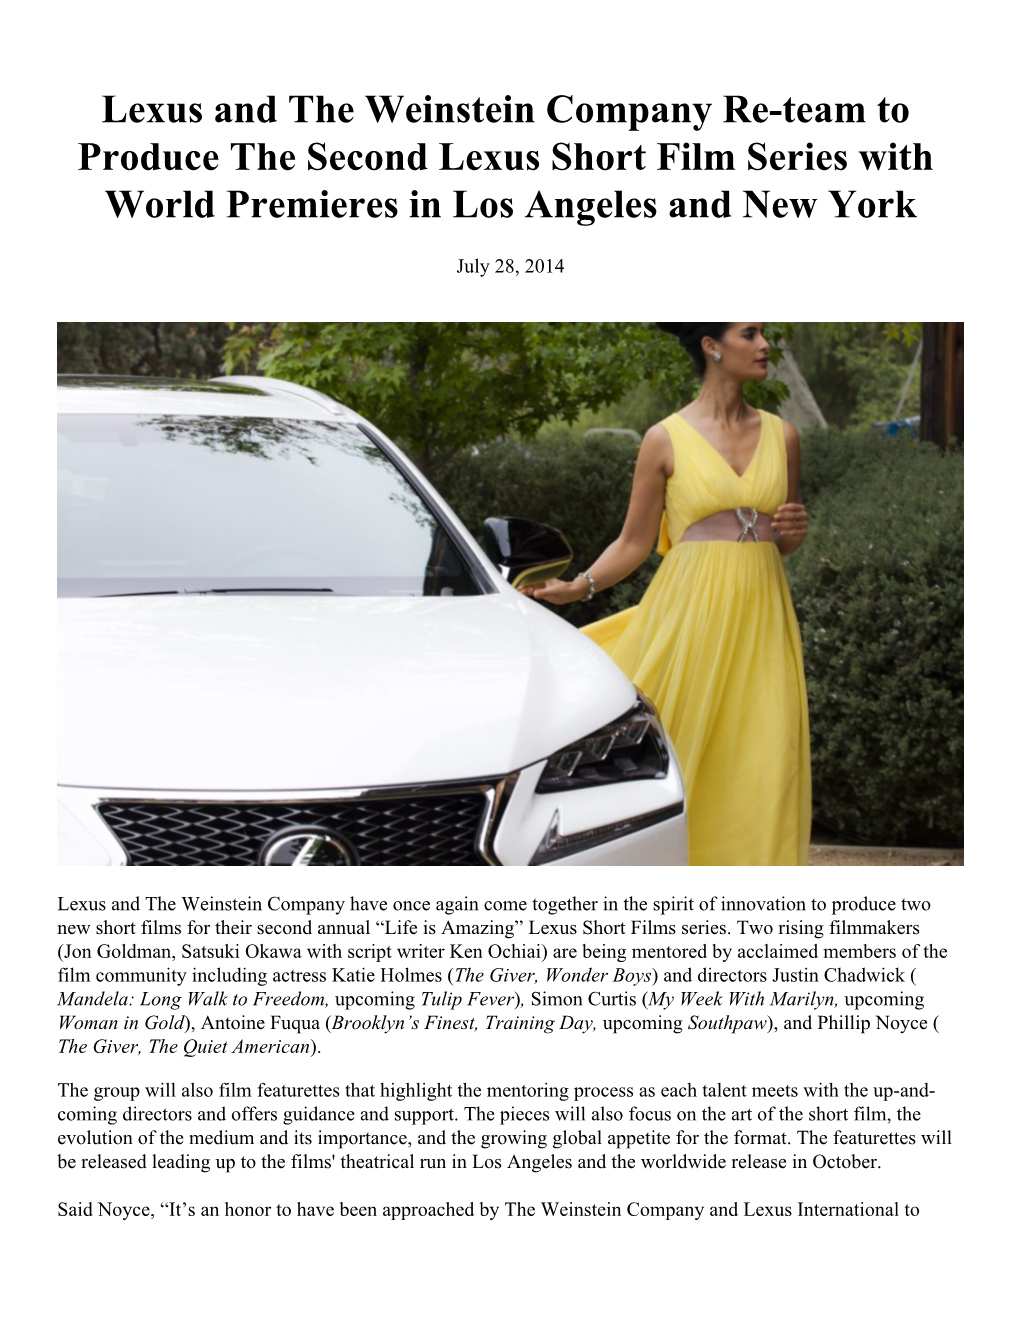 Lexus and the Weinstein Company Re-Team to Produce the Second Lexus Short Film Series with World Premieres in Los Angeles and New York